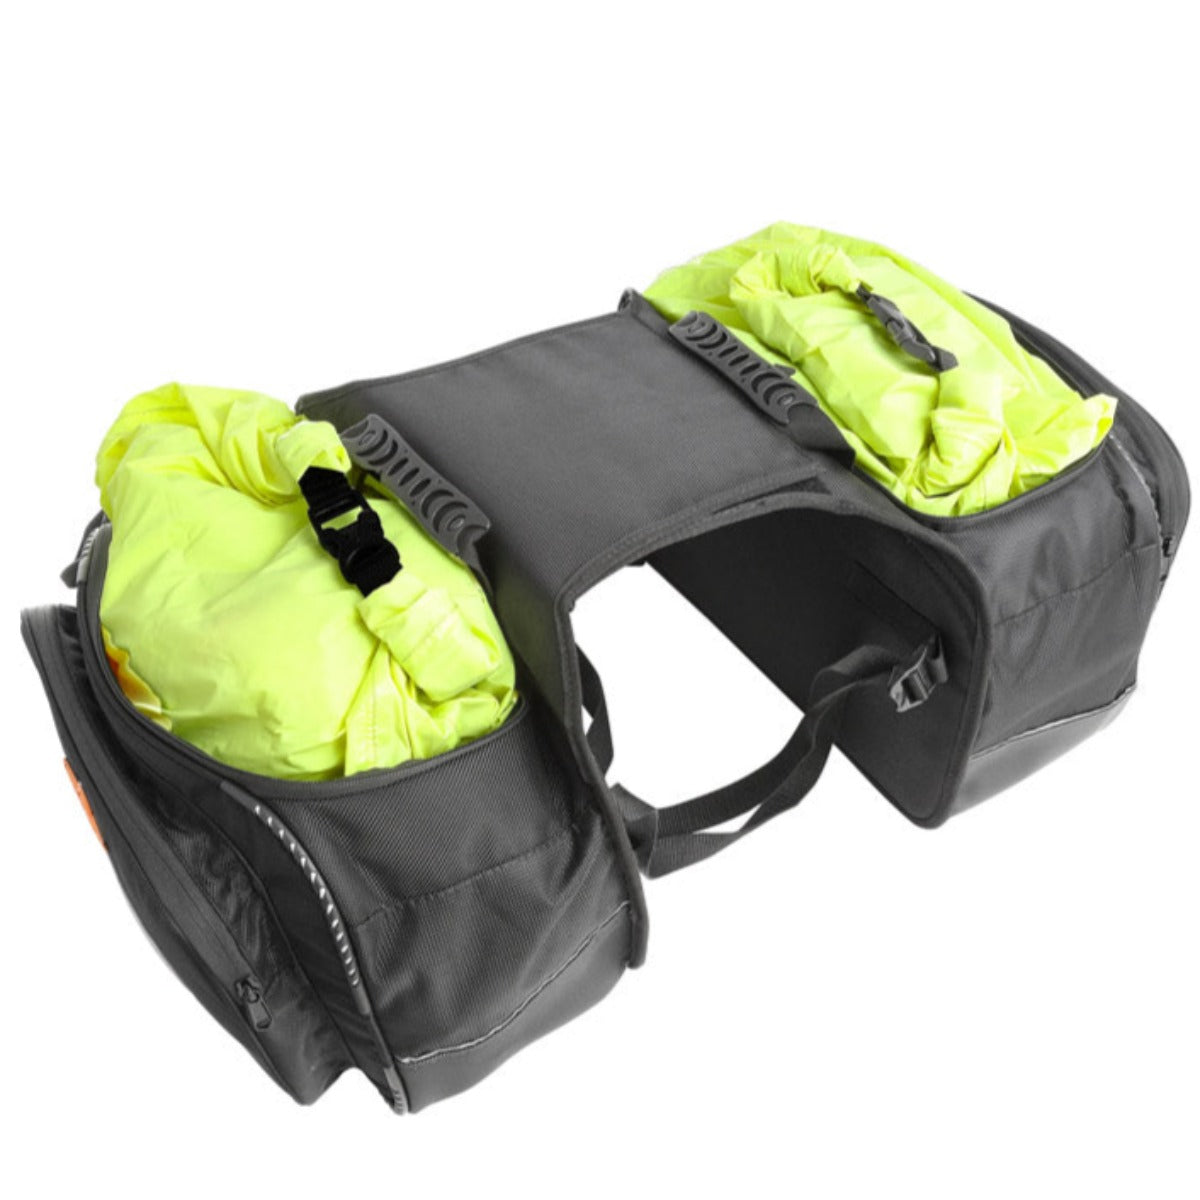 Extra Drybags for Mustang 50L Saddlebags